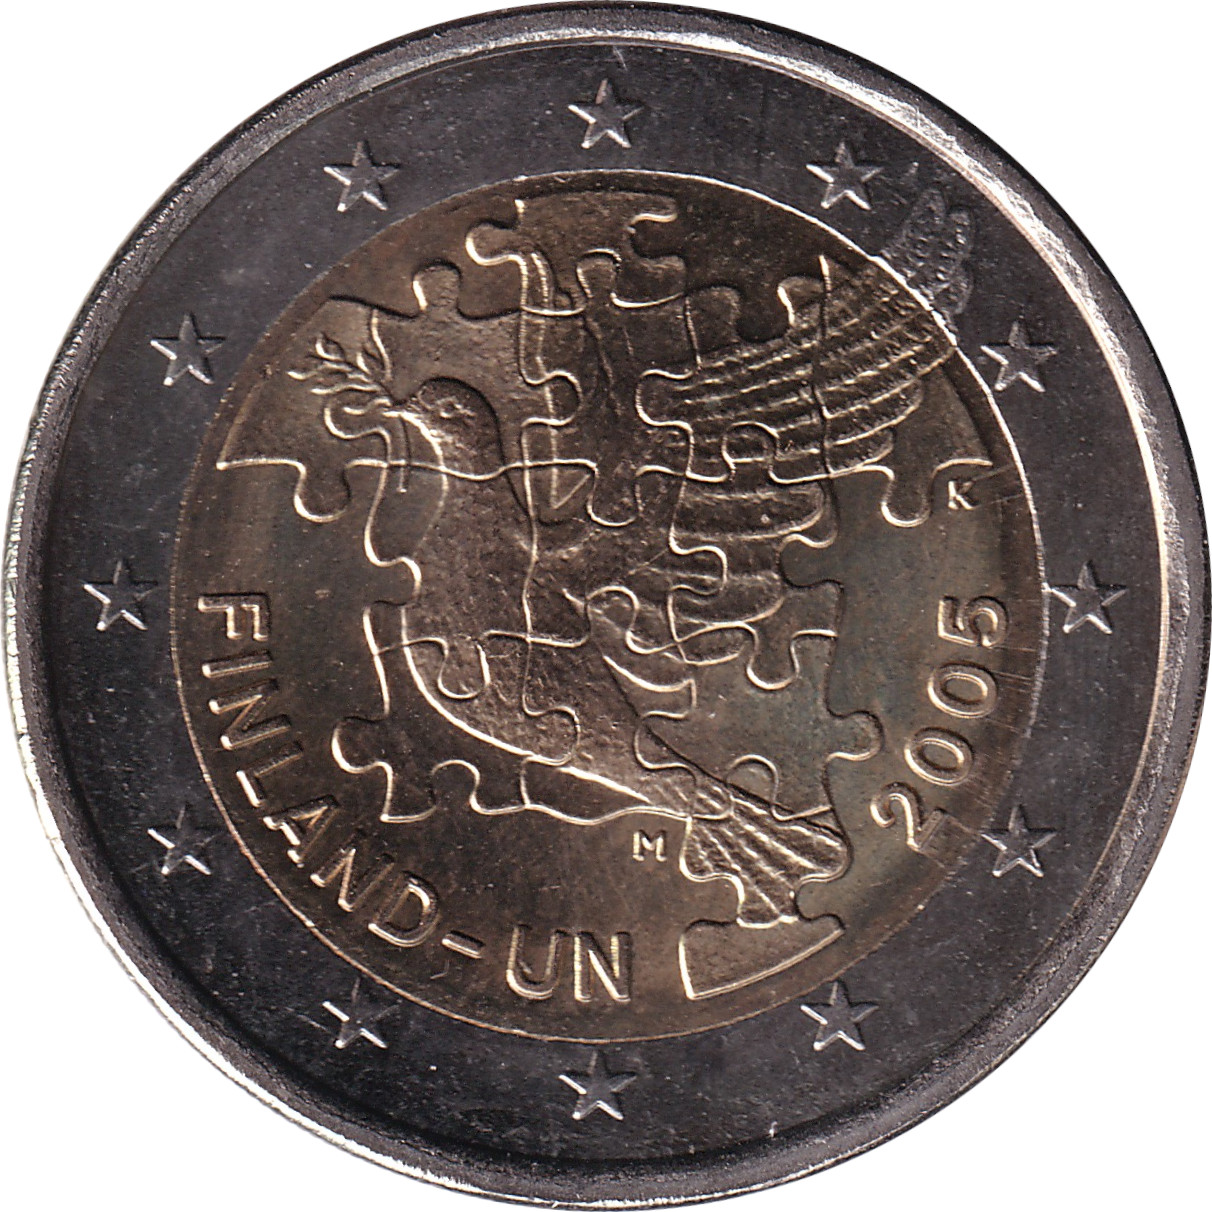 2 euro - Adhésion aux Nations Unies - 50 years